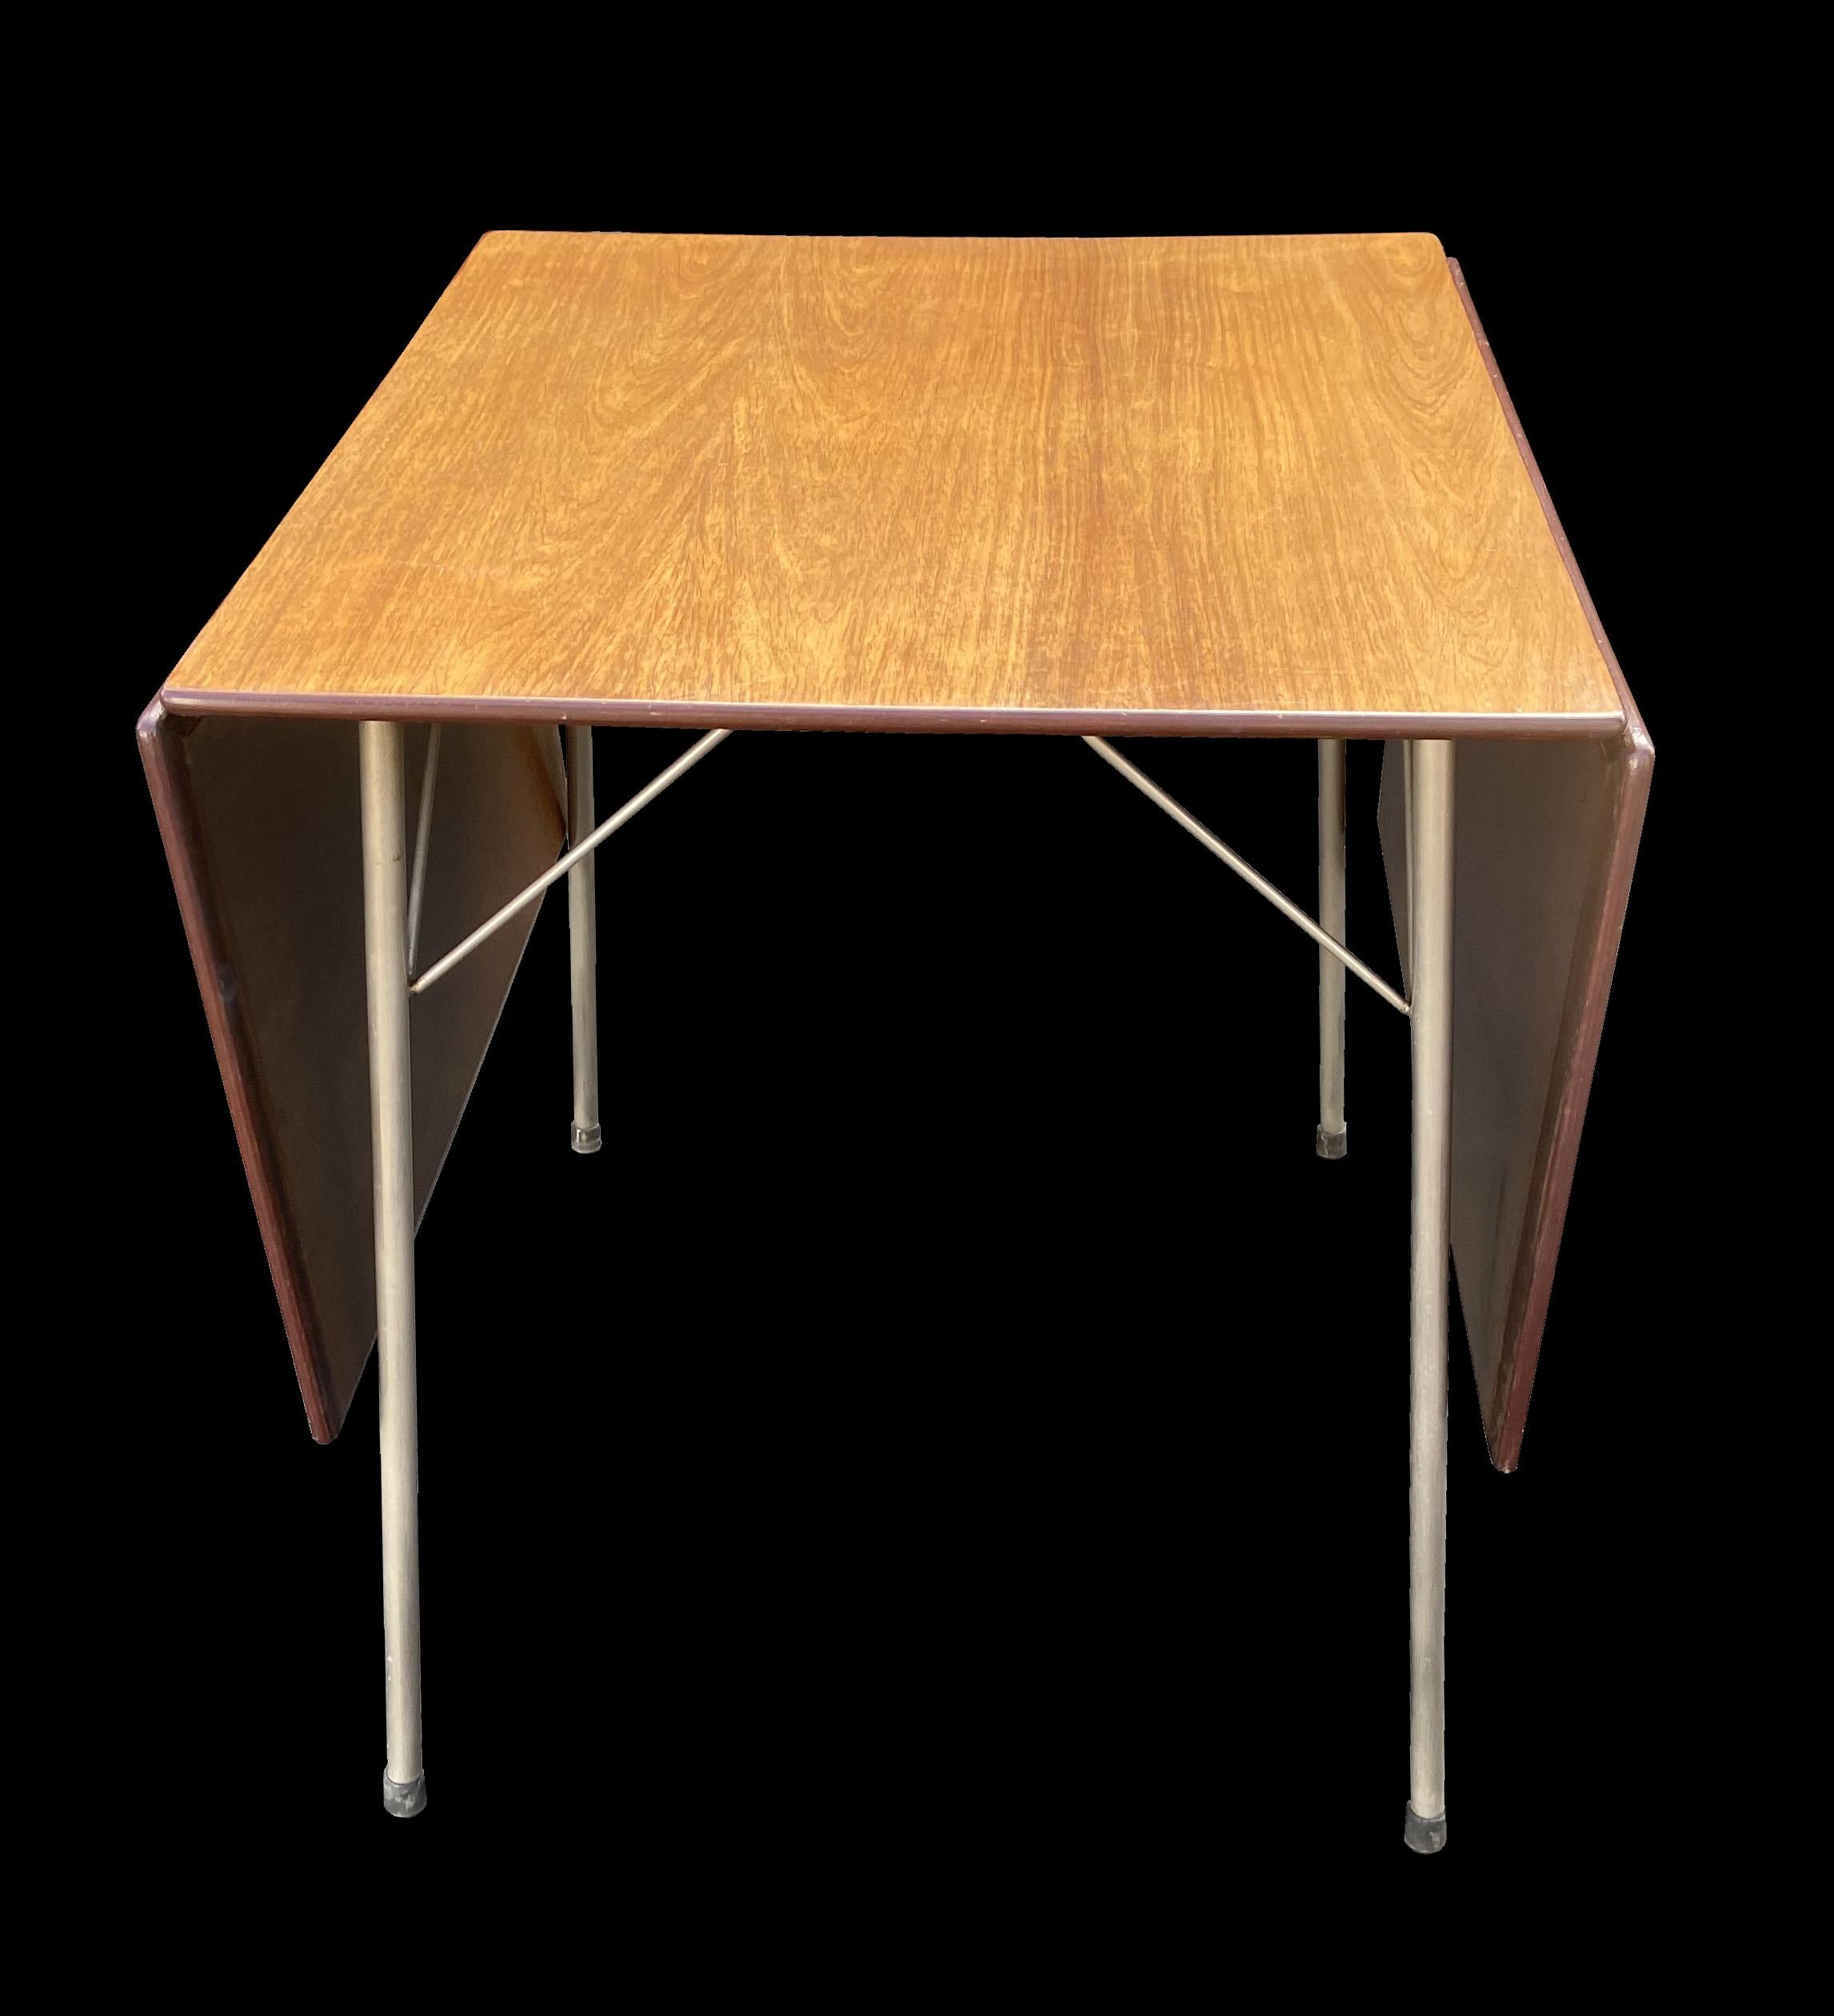 This is an excellent. untouched original example of this drop leaf dining table designed by Arne Jacobsen, the top has a wonderful patina, and the Rosewood has nicely and evenly faded to a really lovely mellow color.
It is 60 mcm wide with no flaps